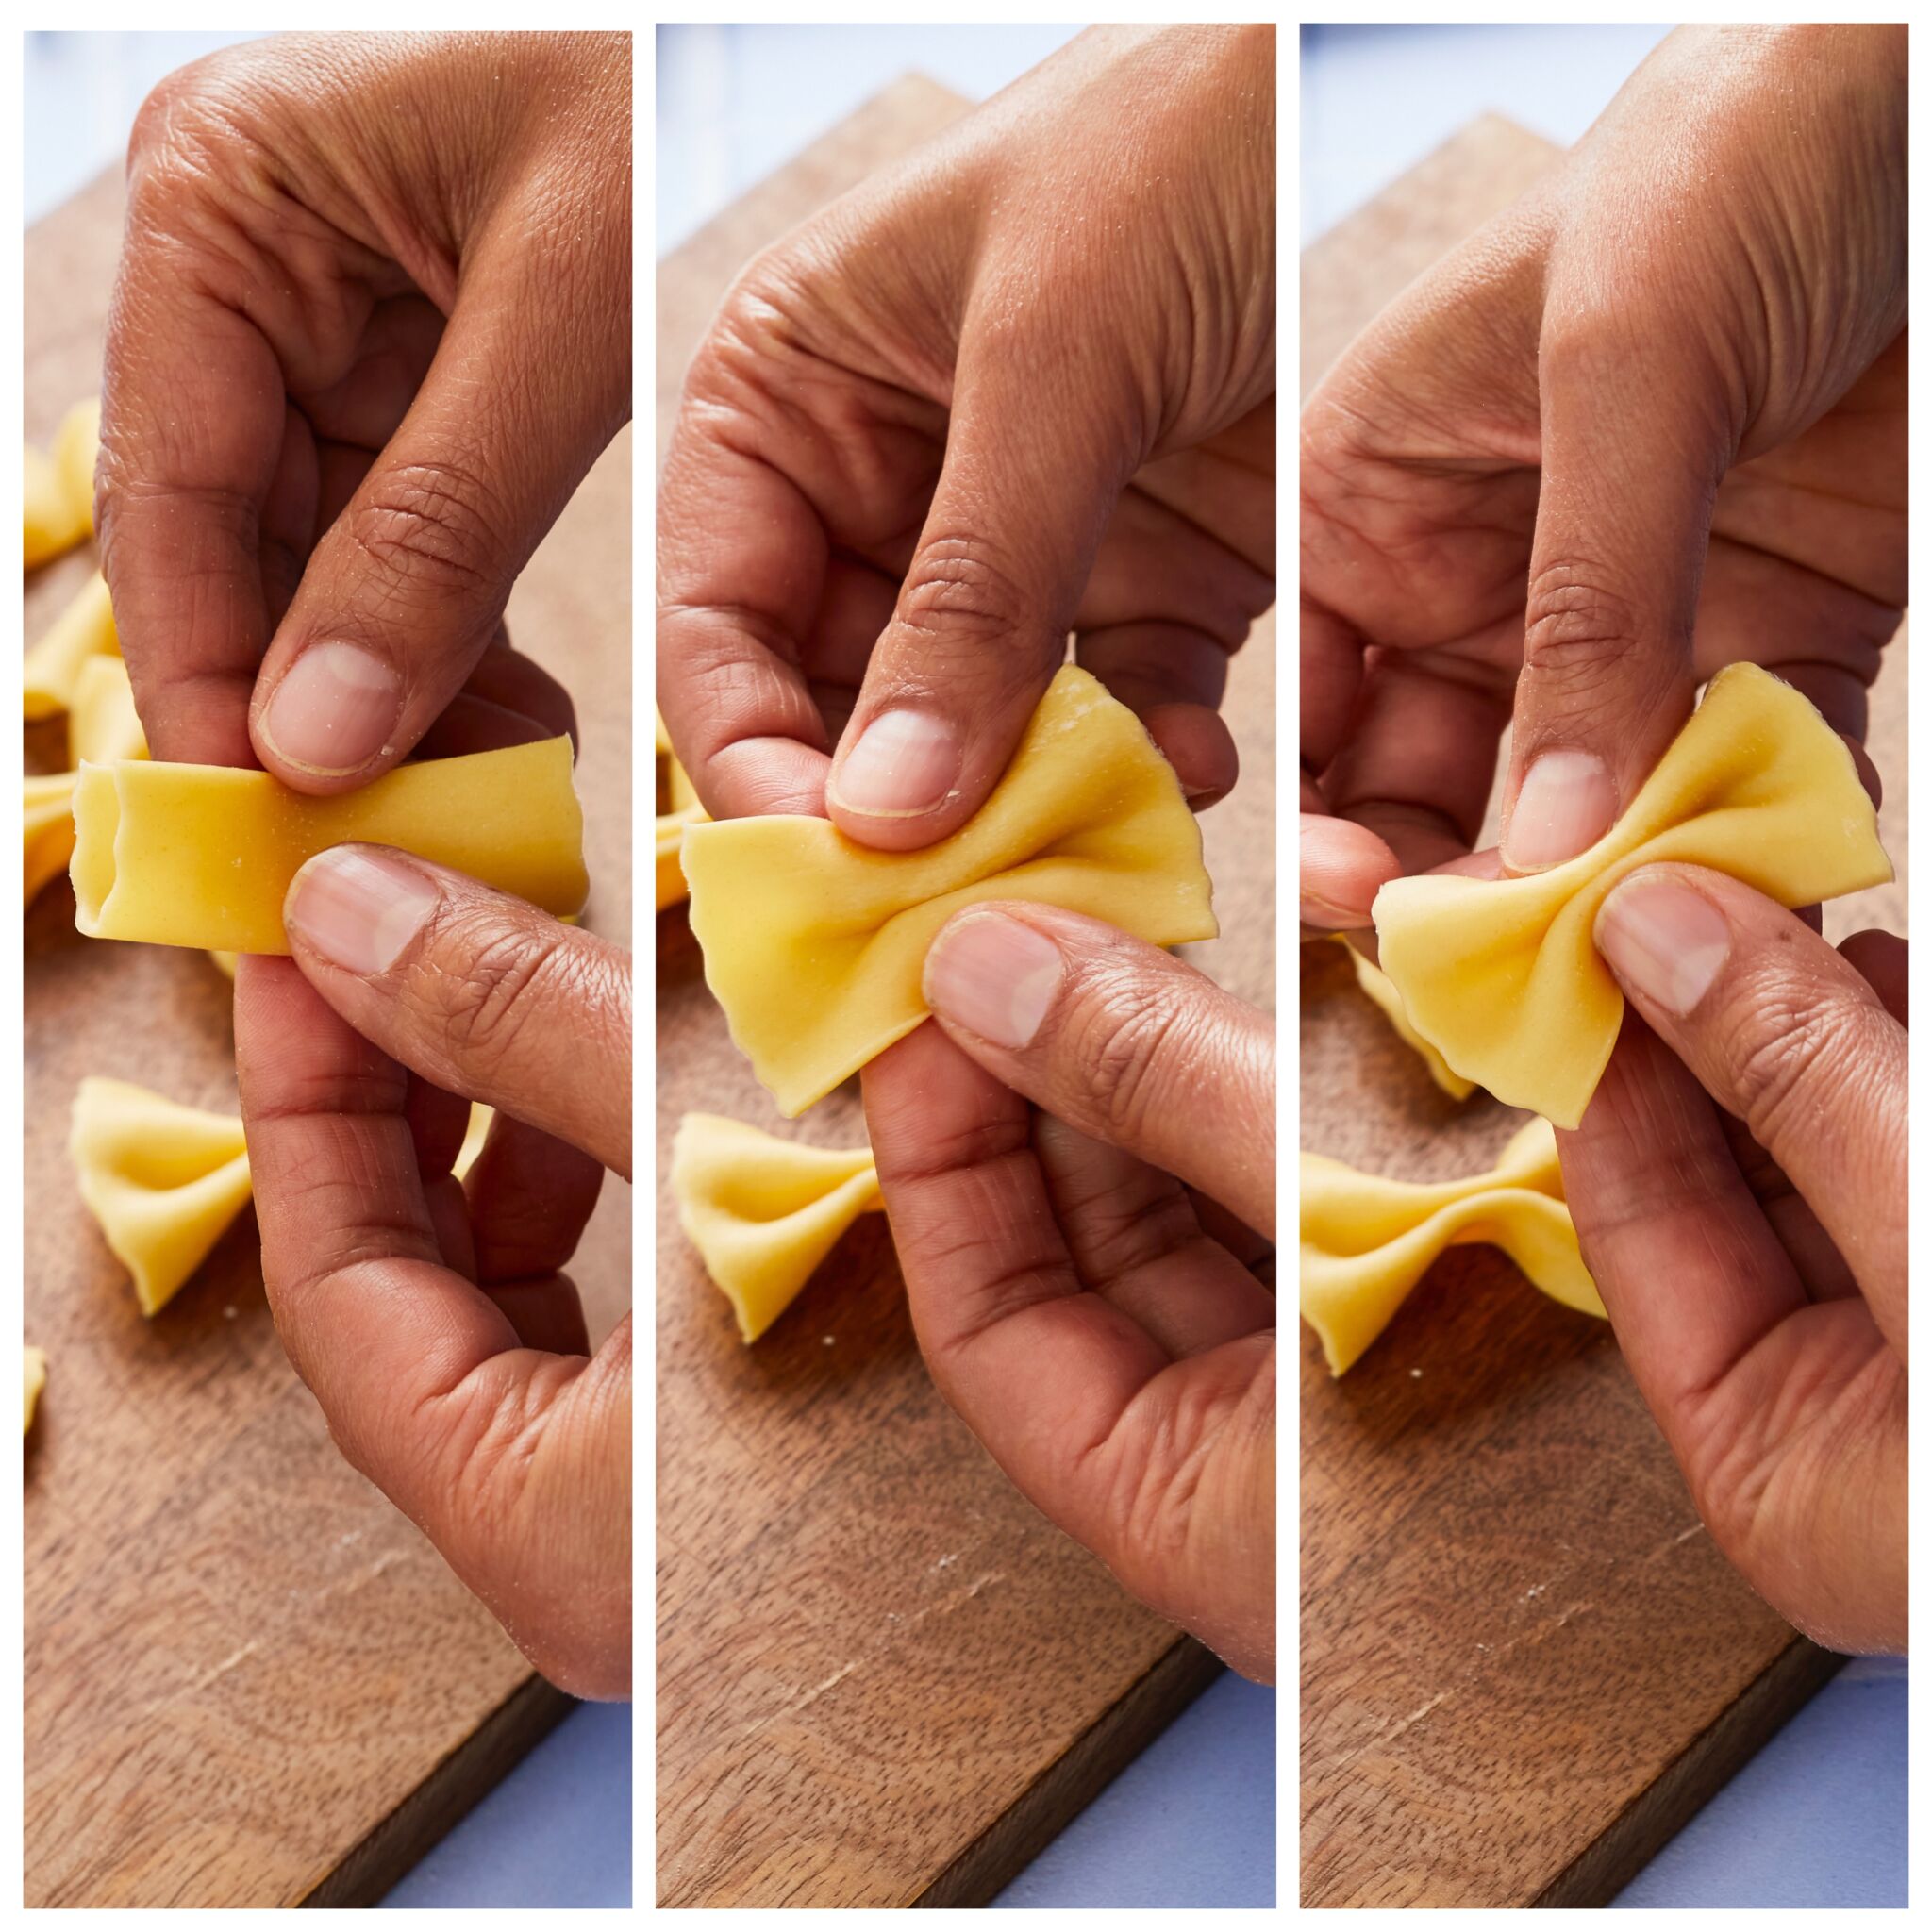 How to Shape Farfalle Pasta: Pick up a rectangular piece of dough, and hold it by the long sides between your thumb and index finger. Pinch the center together, then fold the outer edges in the opposite direction to create an accordion fold in the center.